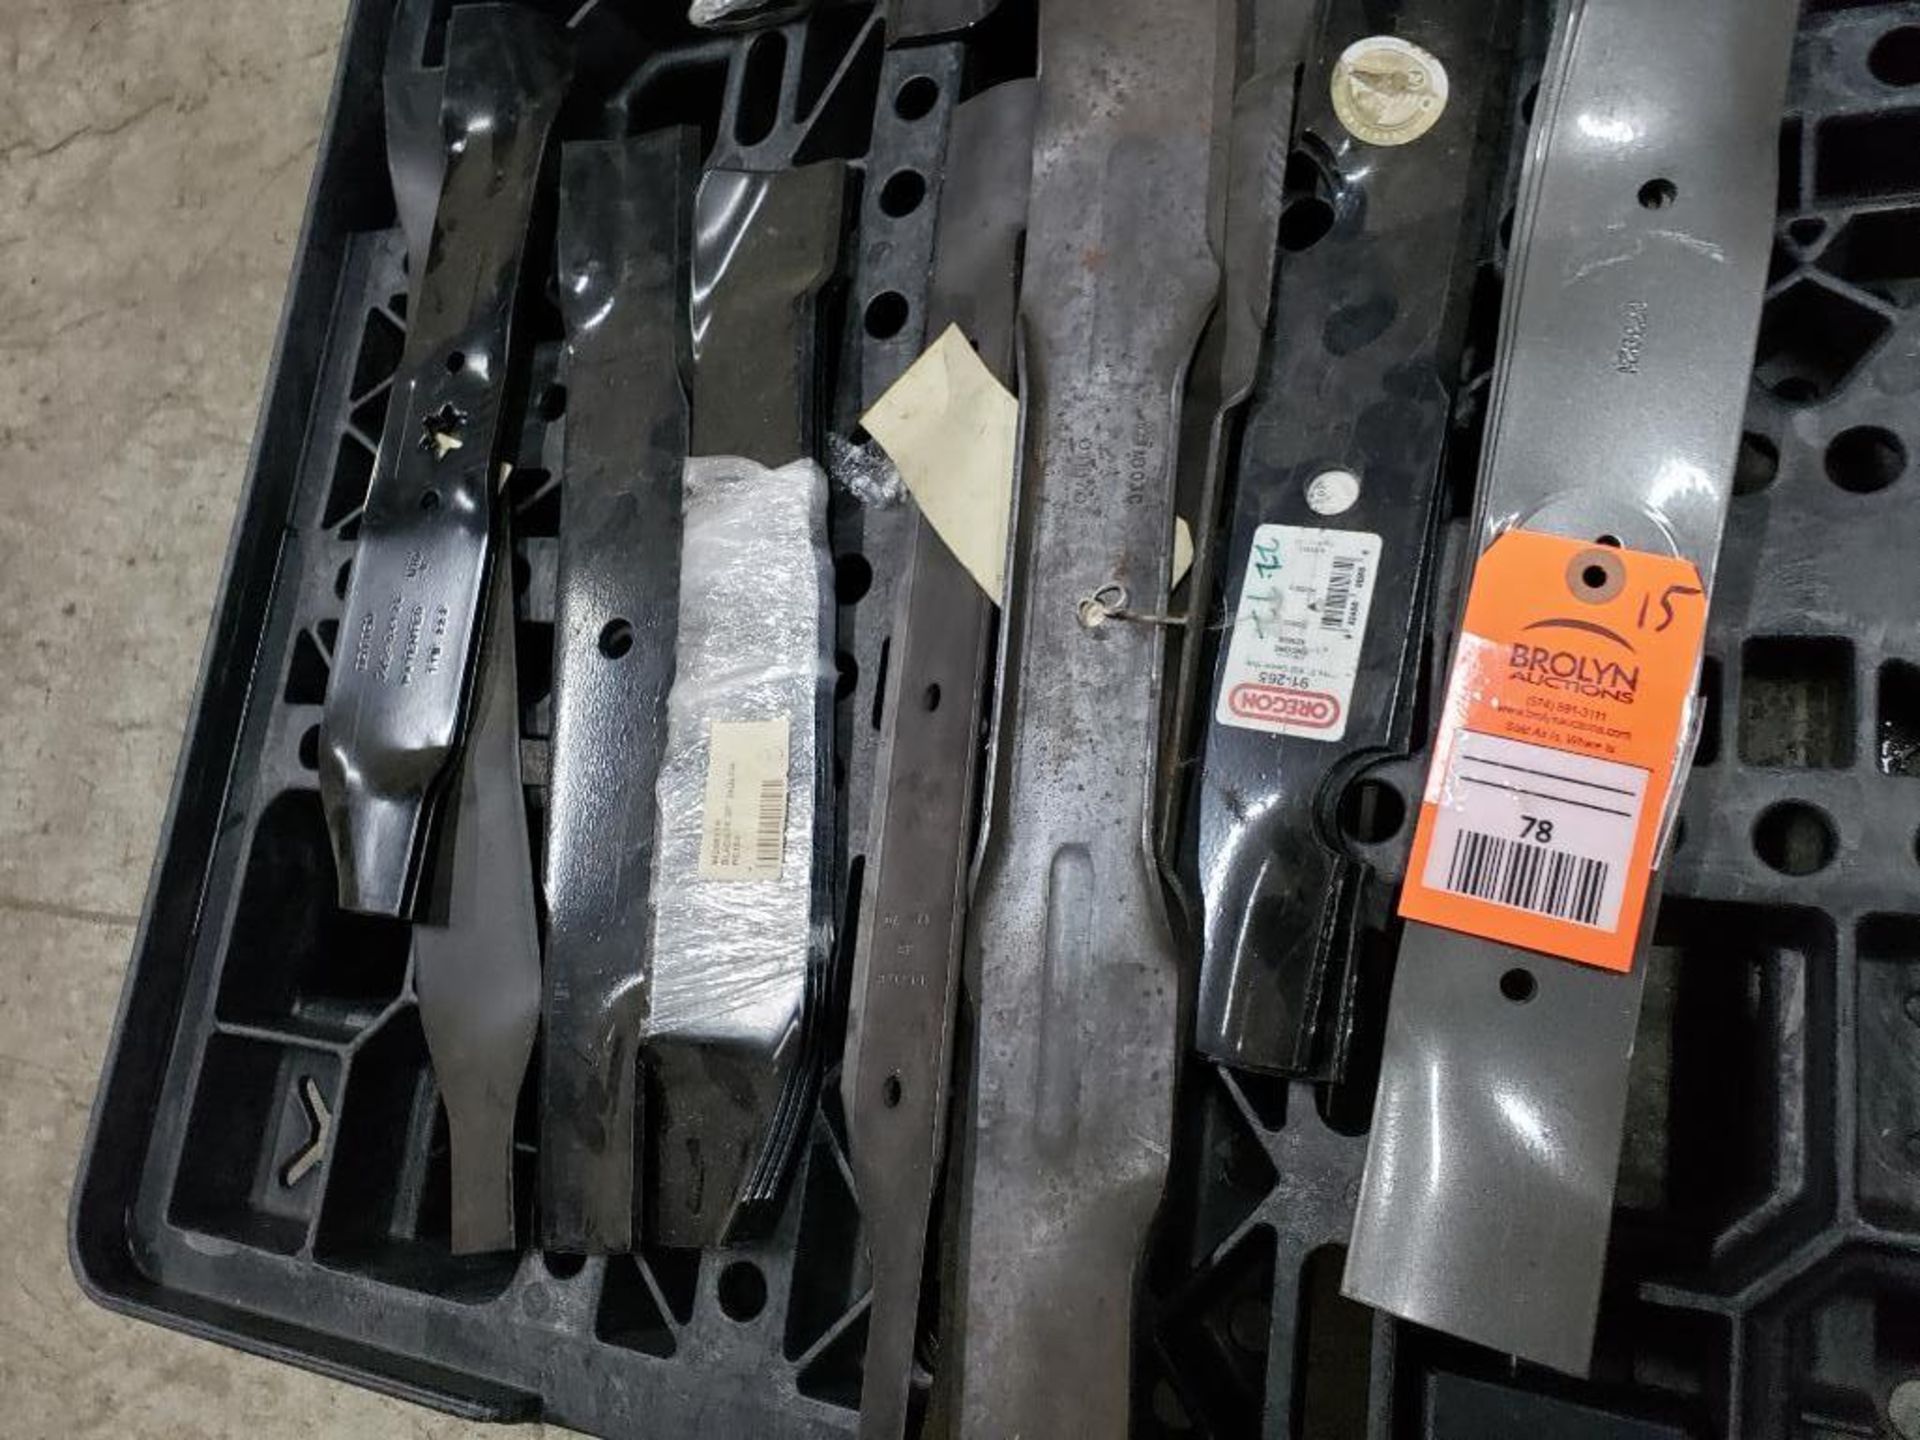 Qty 15 - Assorted mower blades. New old stock.